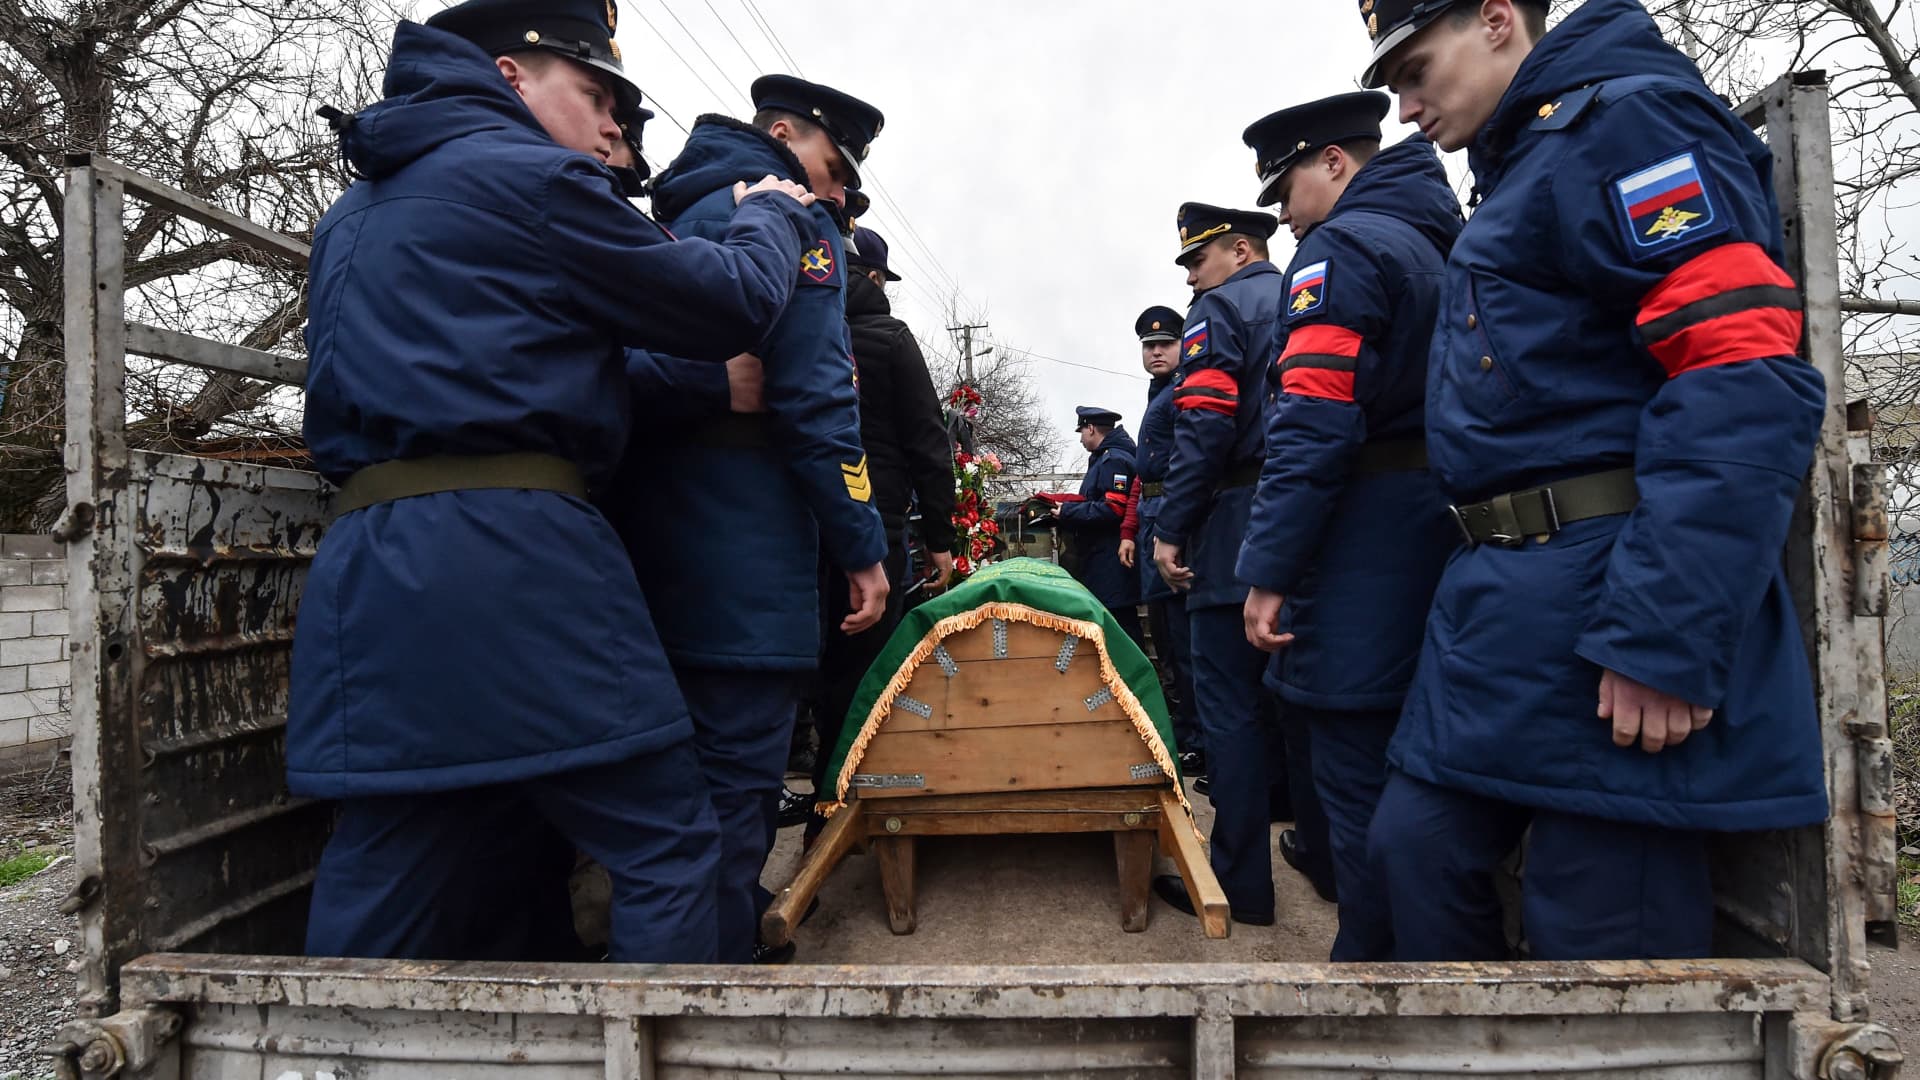 Honor guards attend a funeral of Rustam Zarifulin, 26, who died of wounds on March 14 during the outgoing Russian military action in Ukraine in the city of Kara-Balta some 60 kilometres from Bishkek on March 27, 2022.